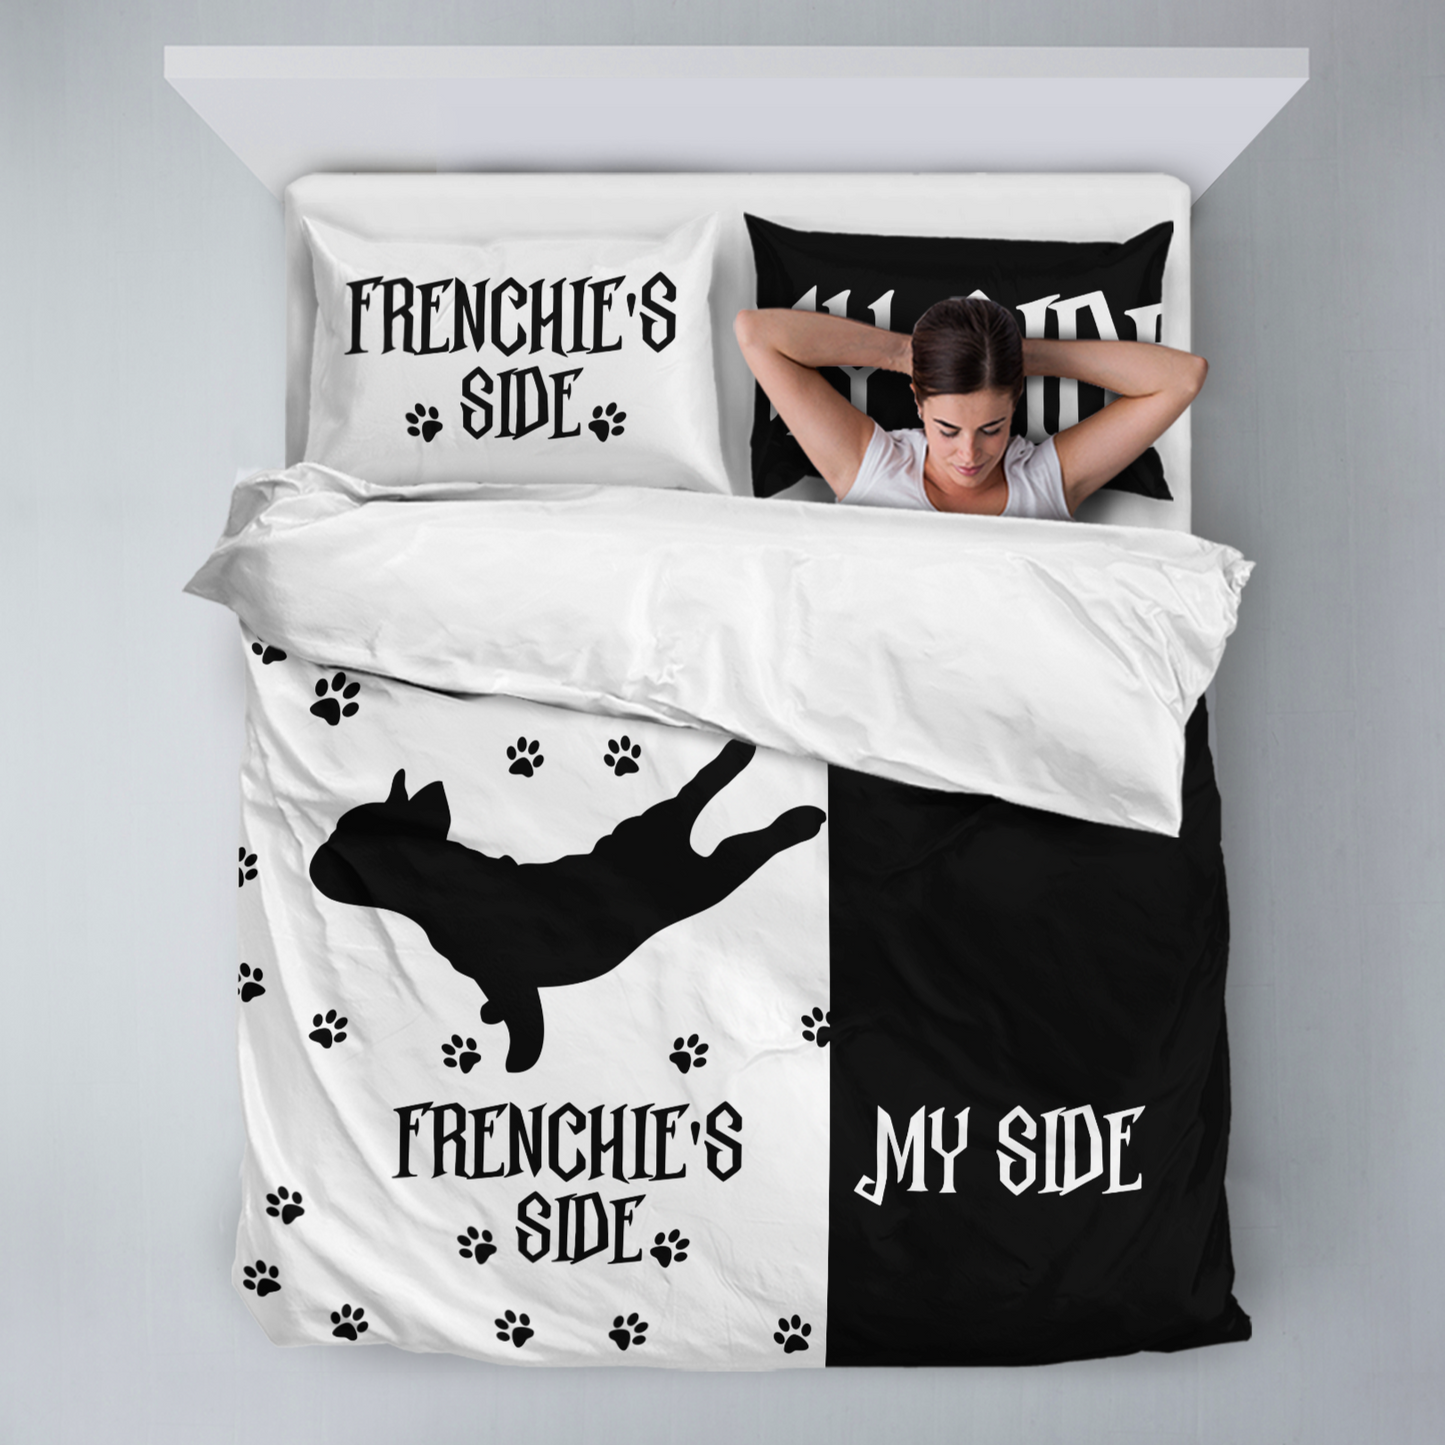 Frenchie's Side 3-Piece Duvet Cover Set